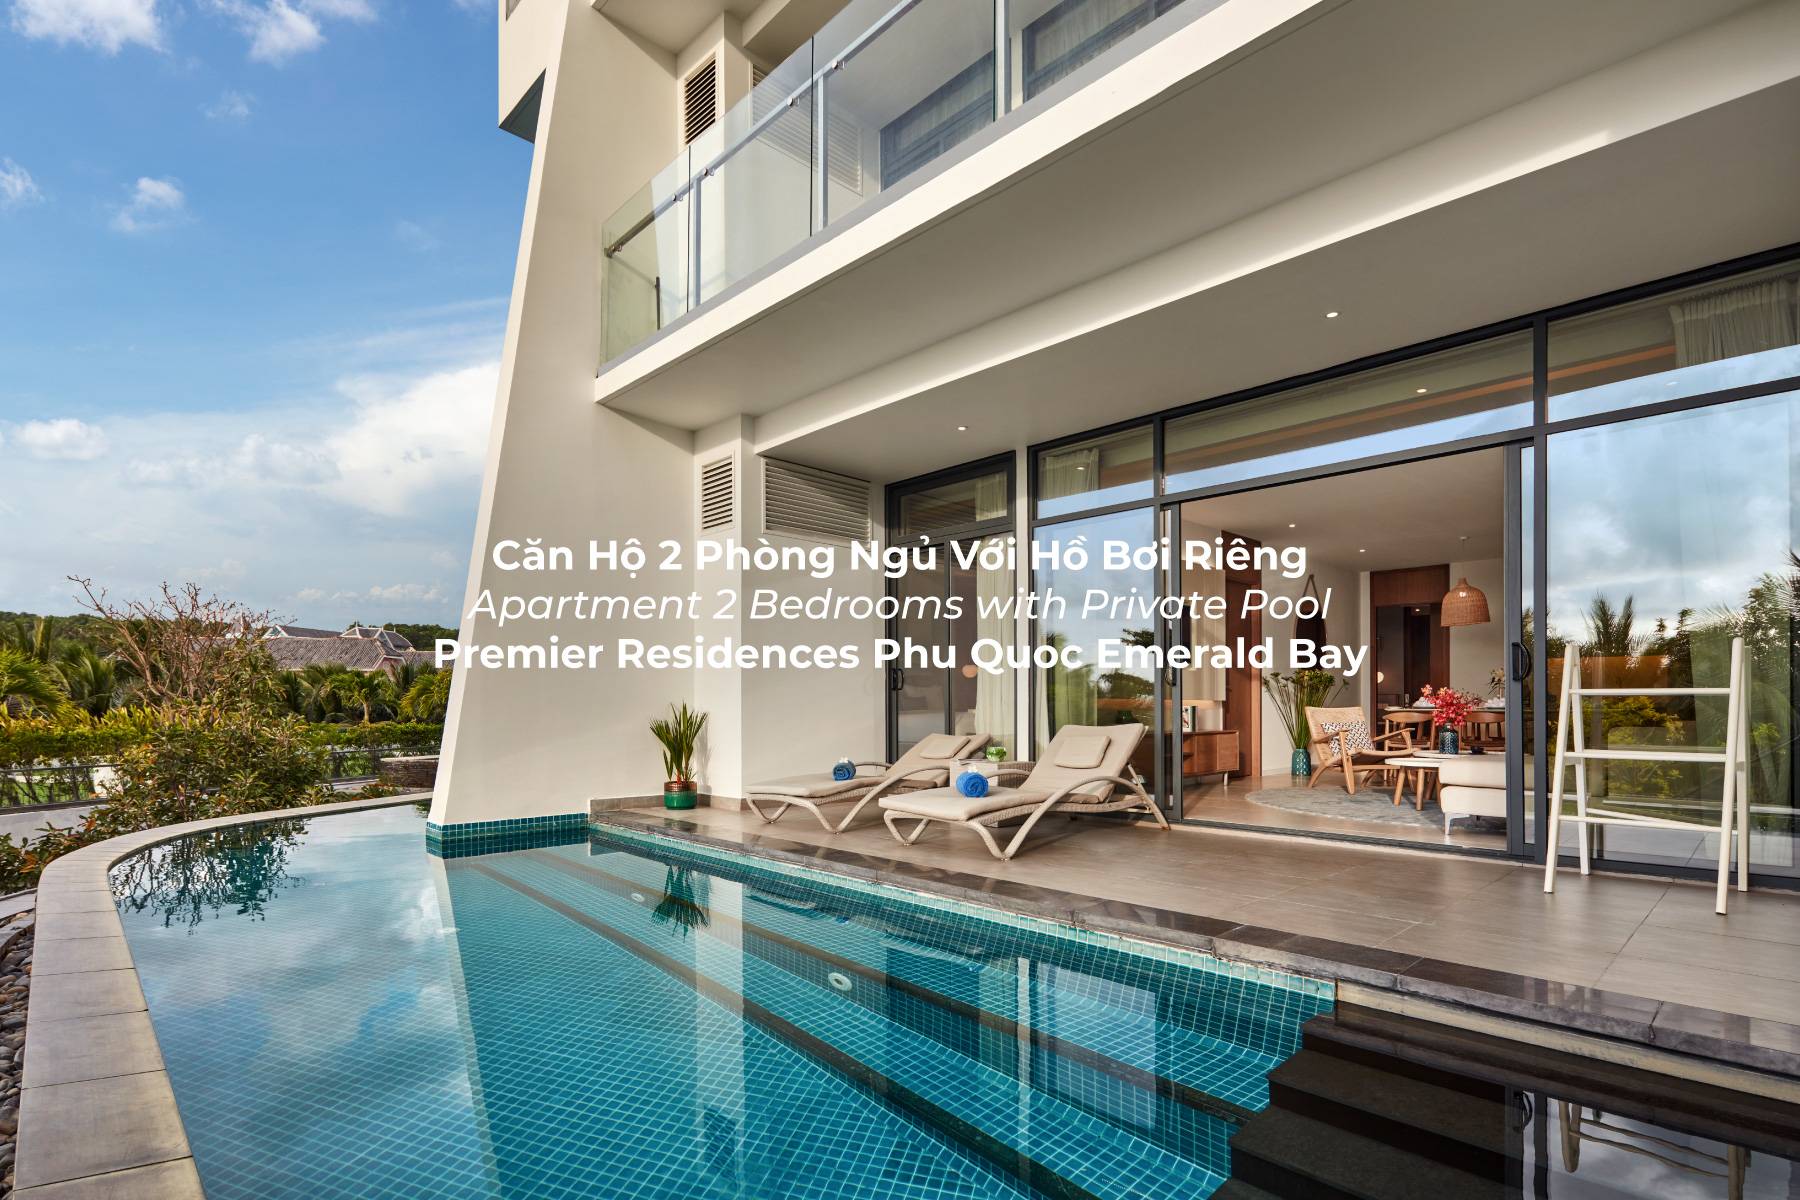 live-in-style-at-premier-residences-phu-quoc